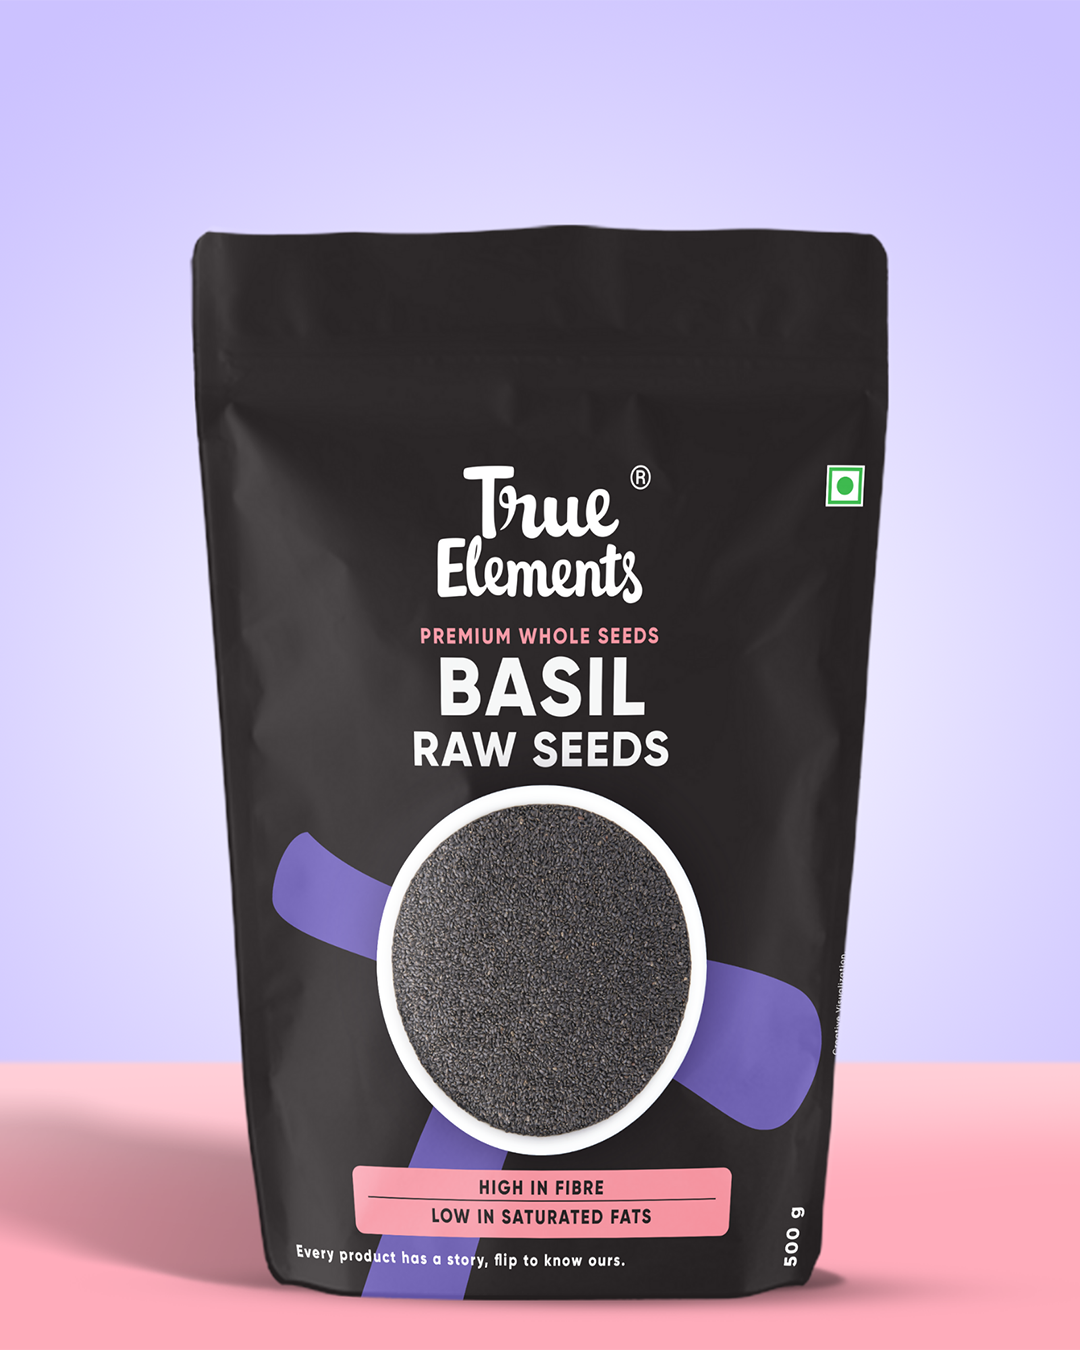 True elements raw basil seeds 500g pouch (Premium Whole Seeds)